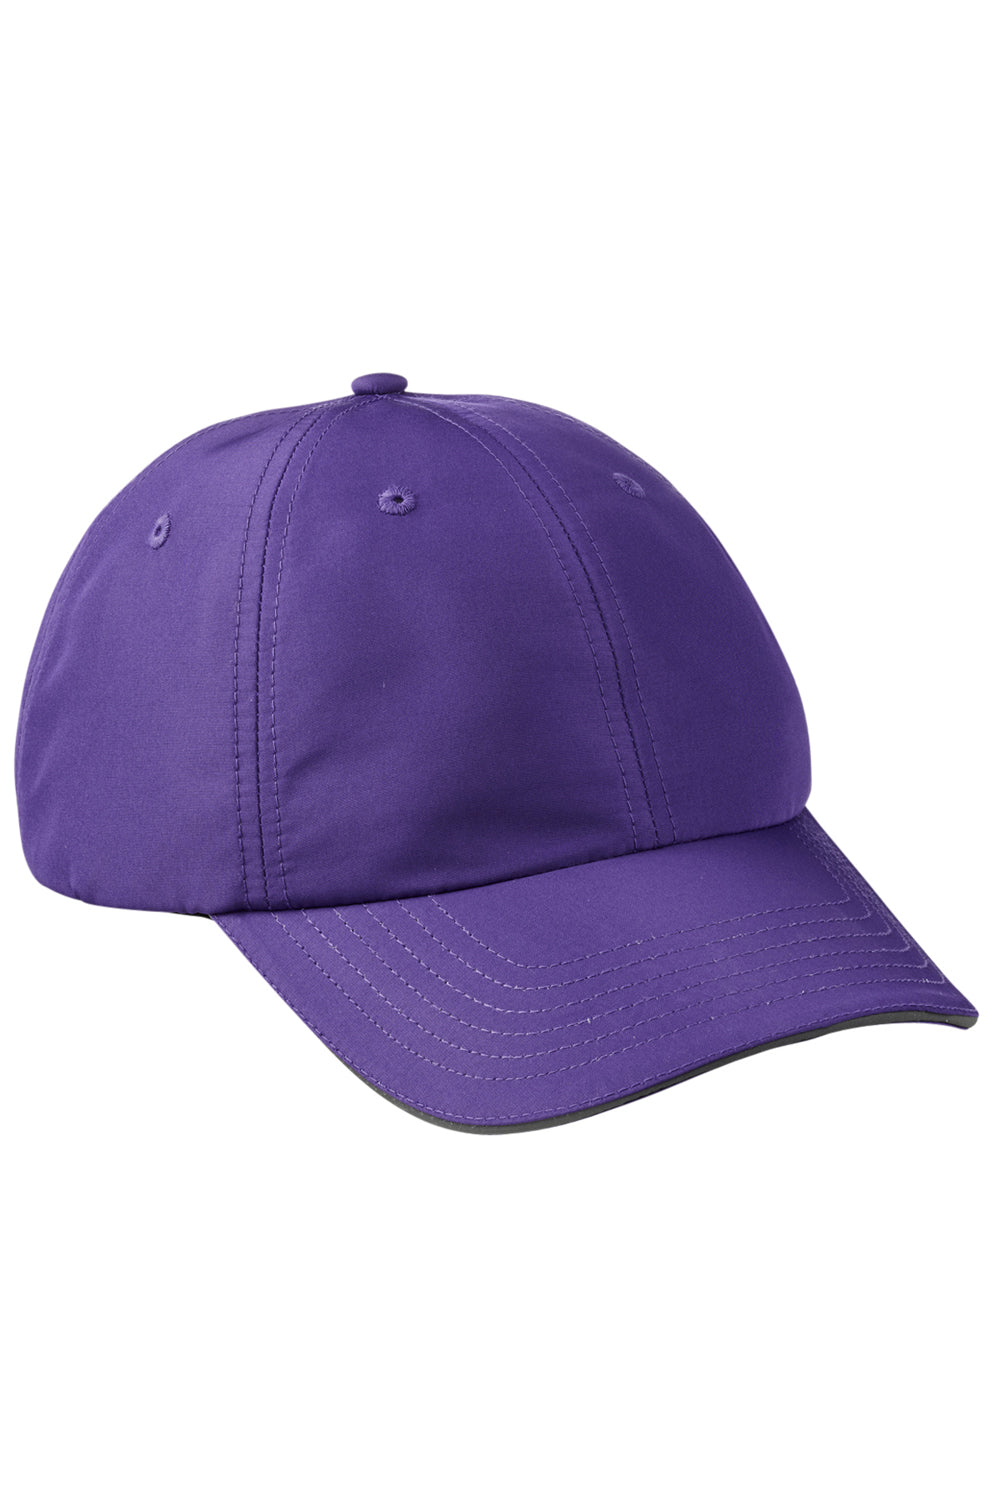 Core 365 CE001 Mens Pitch Performance Moisture Wicking Adjustable Hat Purple Front